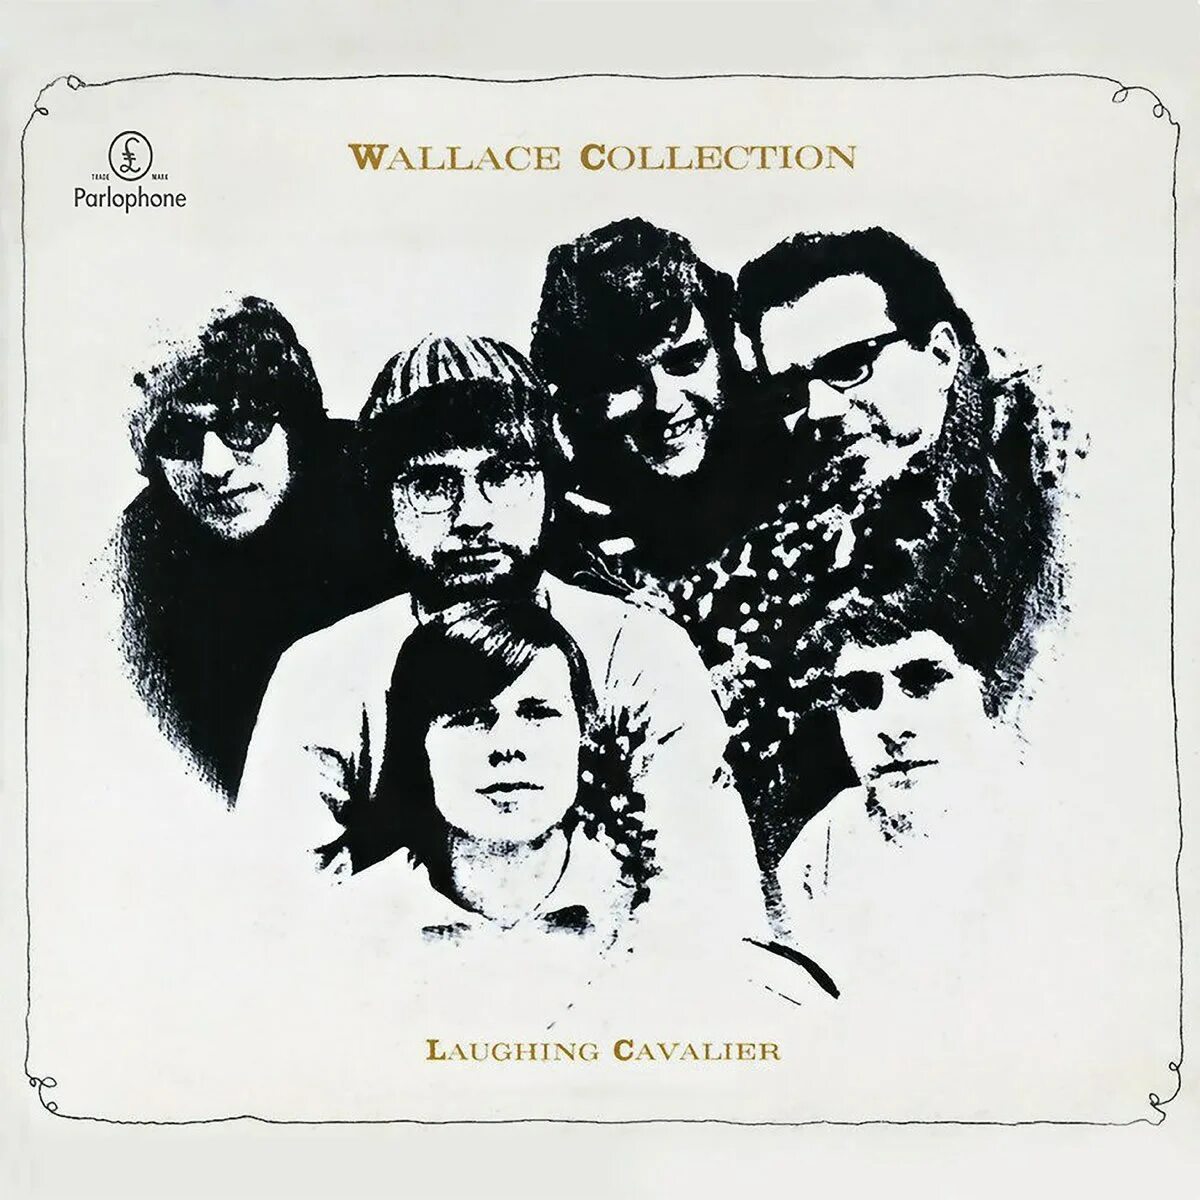 Wallace collection 1969 - laughing Cavalier. Wallace Band обложки. Wallace collection распечатка. Обложка для mp3 Wallace_collection-Daydream.